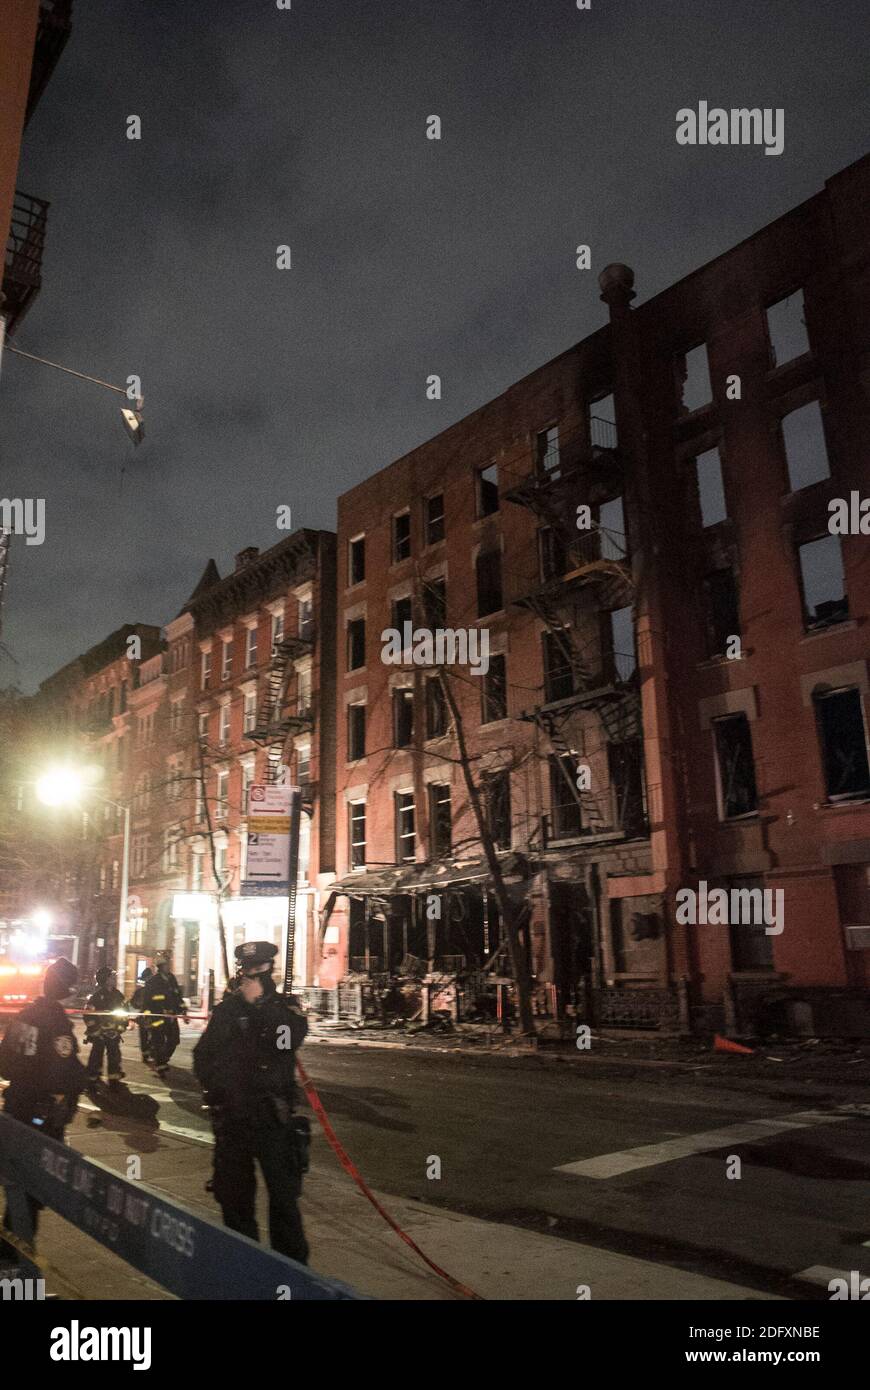 December 5, 2020, New York City, New York, U.S: Massive Fire Devastates Historic Church In East Village. The six-alarm fire started in a vacant building at East Seventh Street and Second Avenue before spreading to Middle Collegiate Church. The fire, which broke out just before 5 a.m. in a vacant building, quickly spread to Middle Collegiate Church as well as another nearby building on East Seventh Street, FDNY Assistant Chief John Hodgens said Saturday morning. Built in 1892, the church is home to the oldest congregation of the Collegiate Churches of New York, which date to the Dutch settlemen Stock Photo